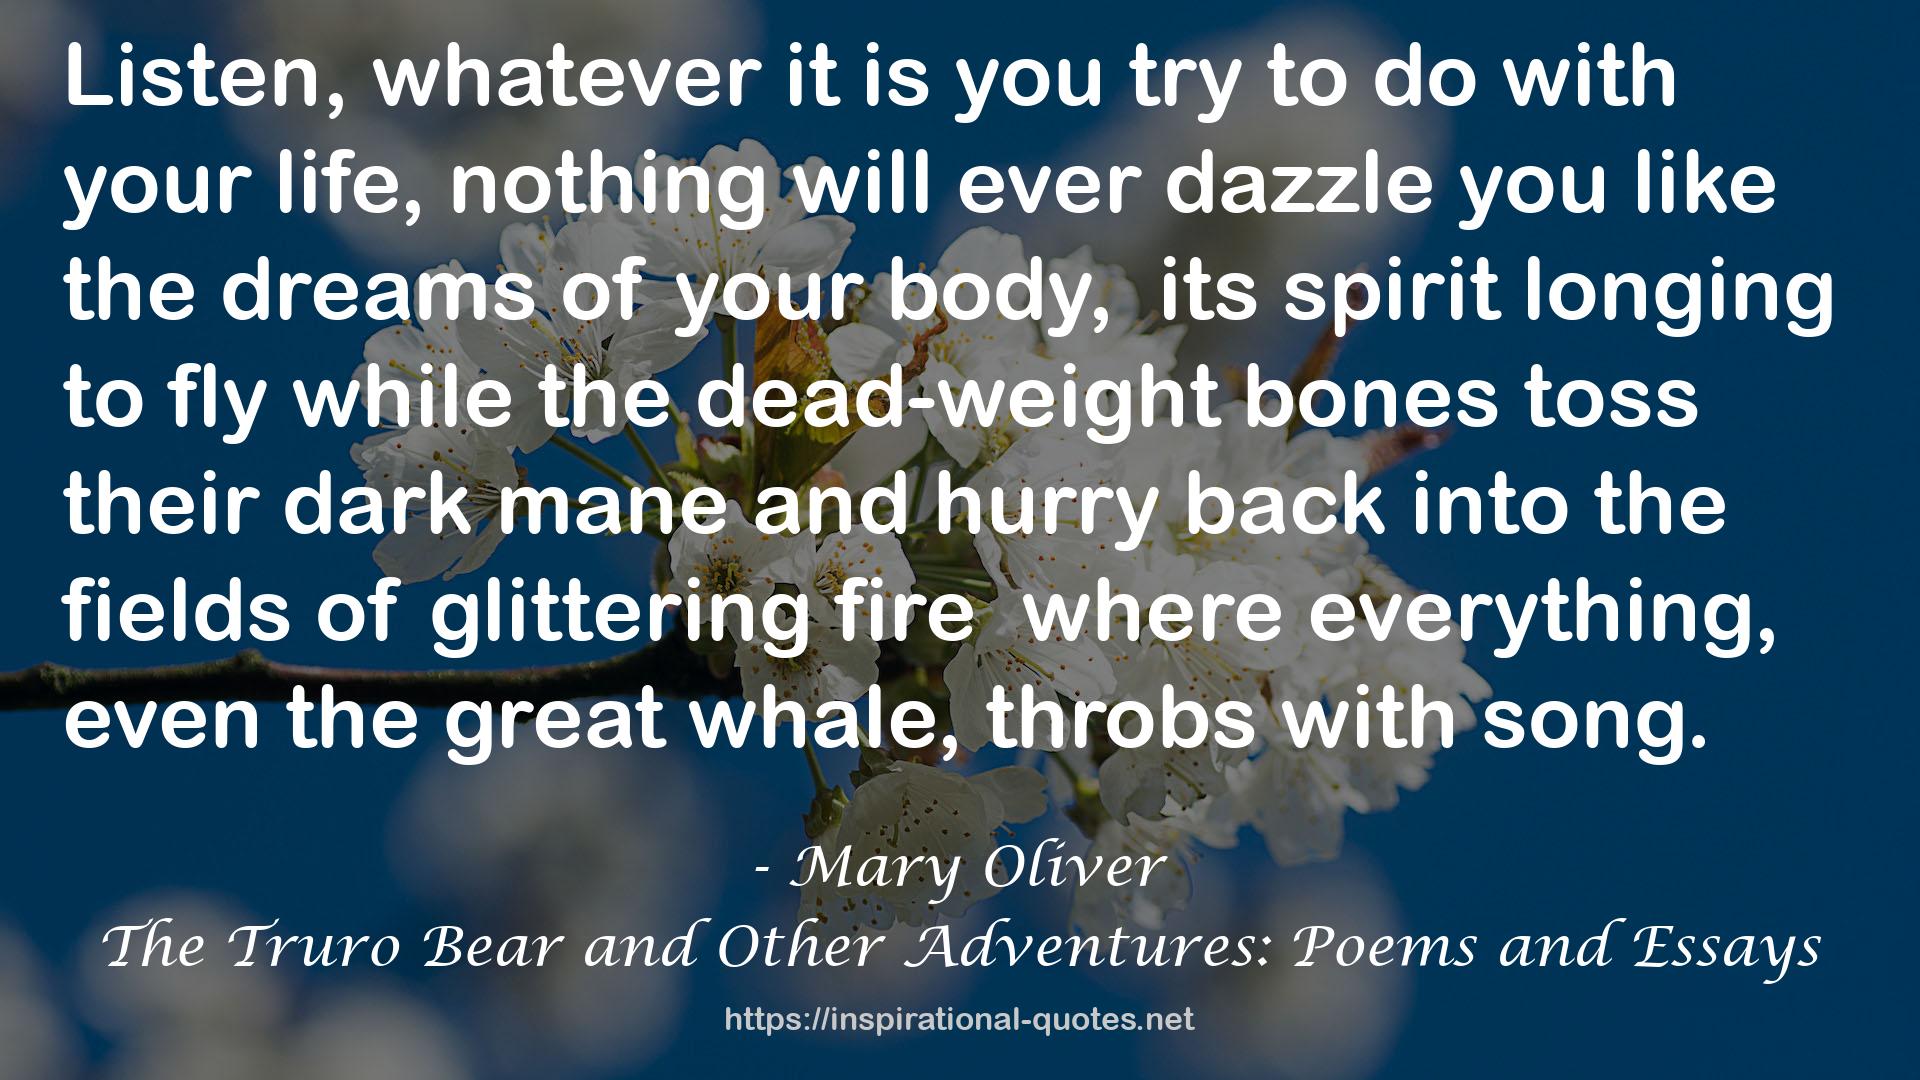 The Truro Bear and Other Adventures: Poems and Essays QUOTES